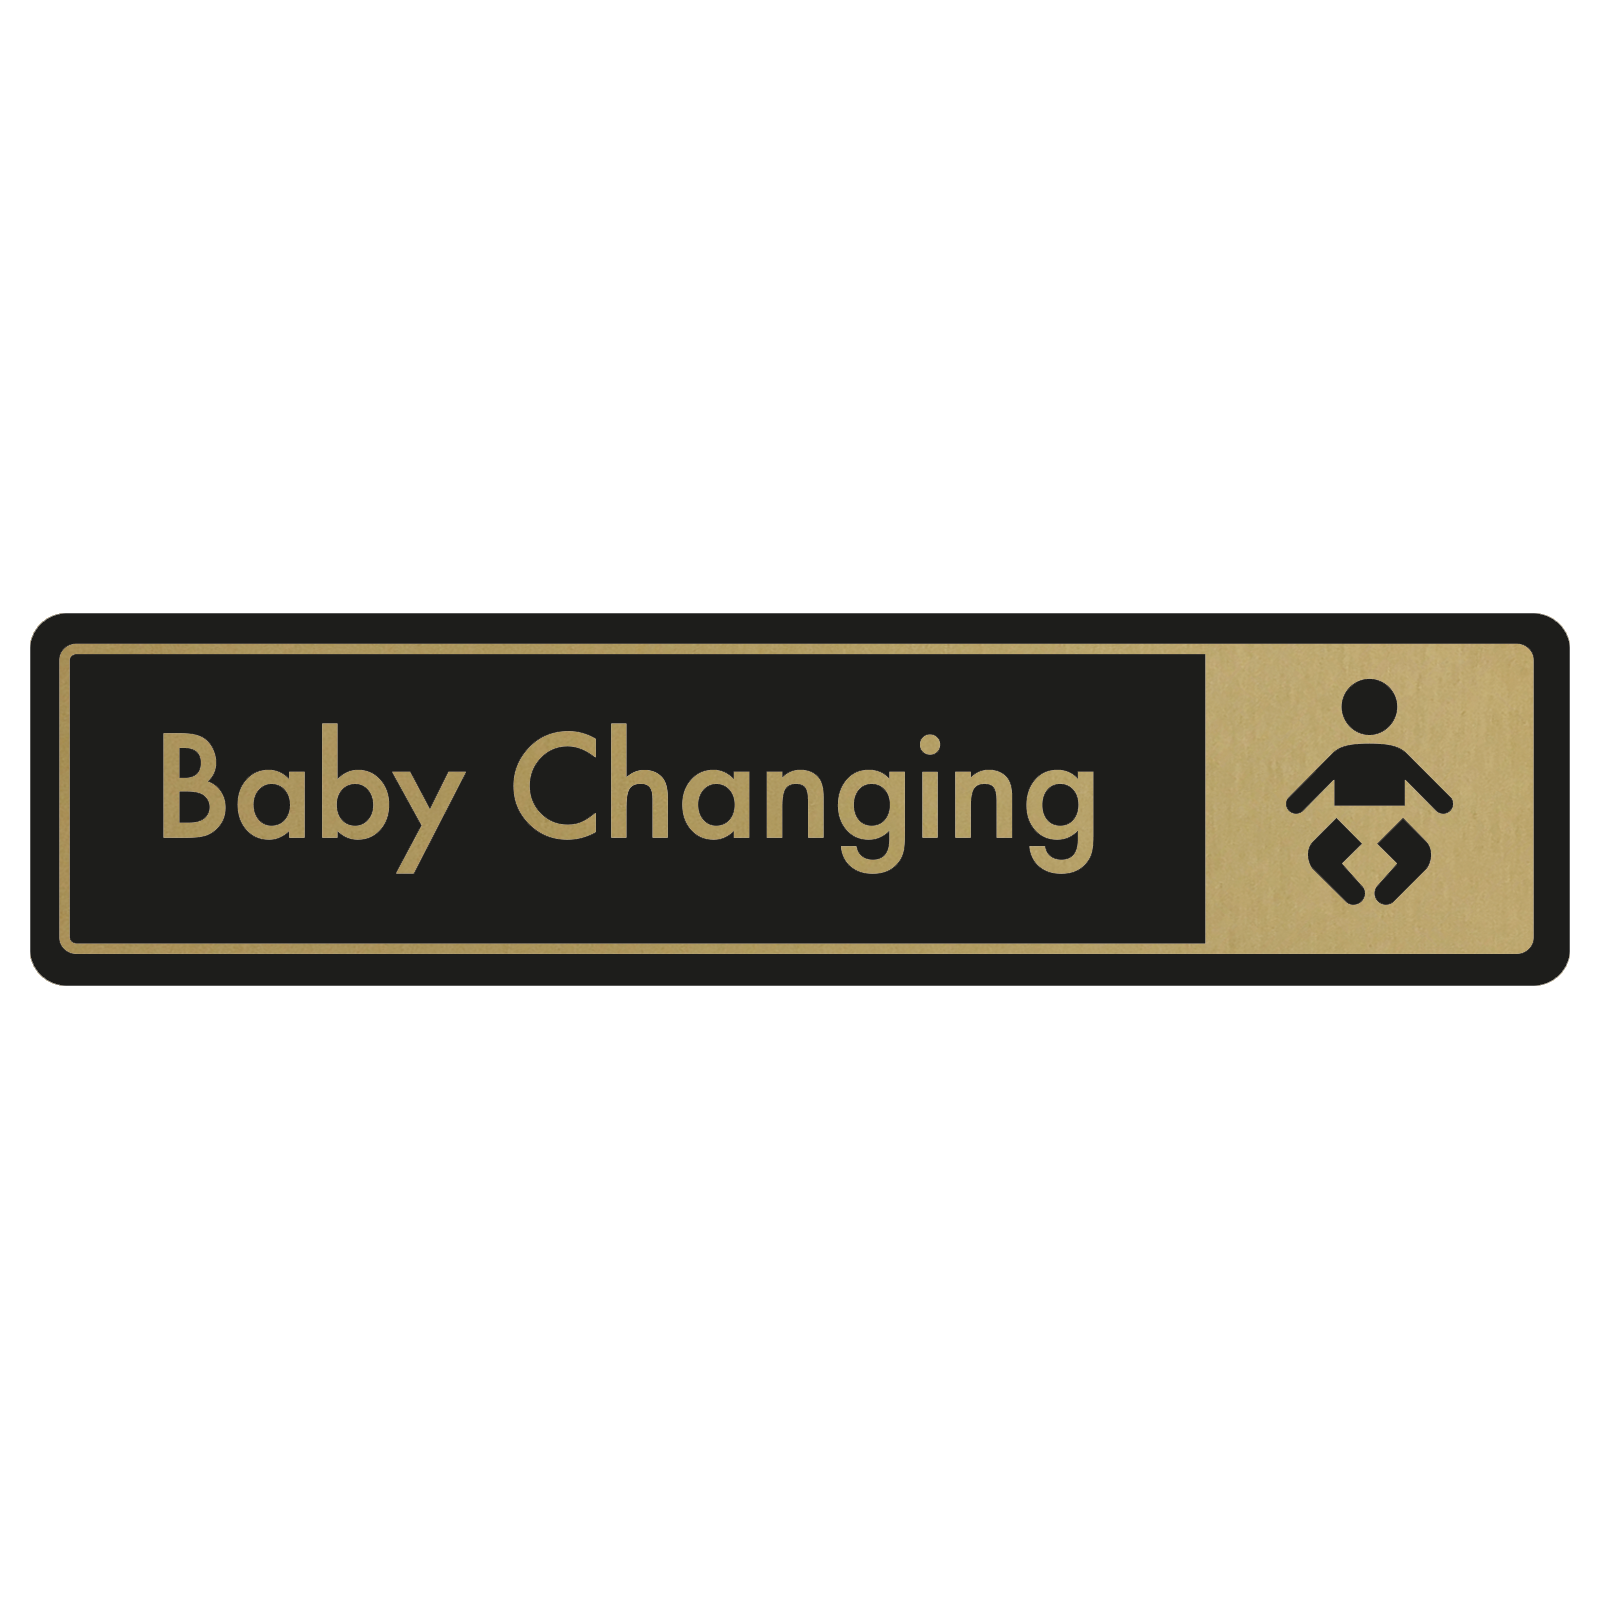 Baby Changing Door Sign - Gold on Black